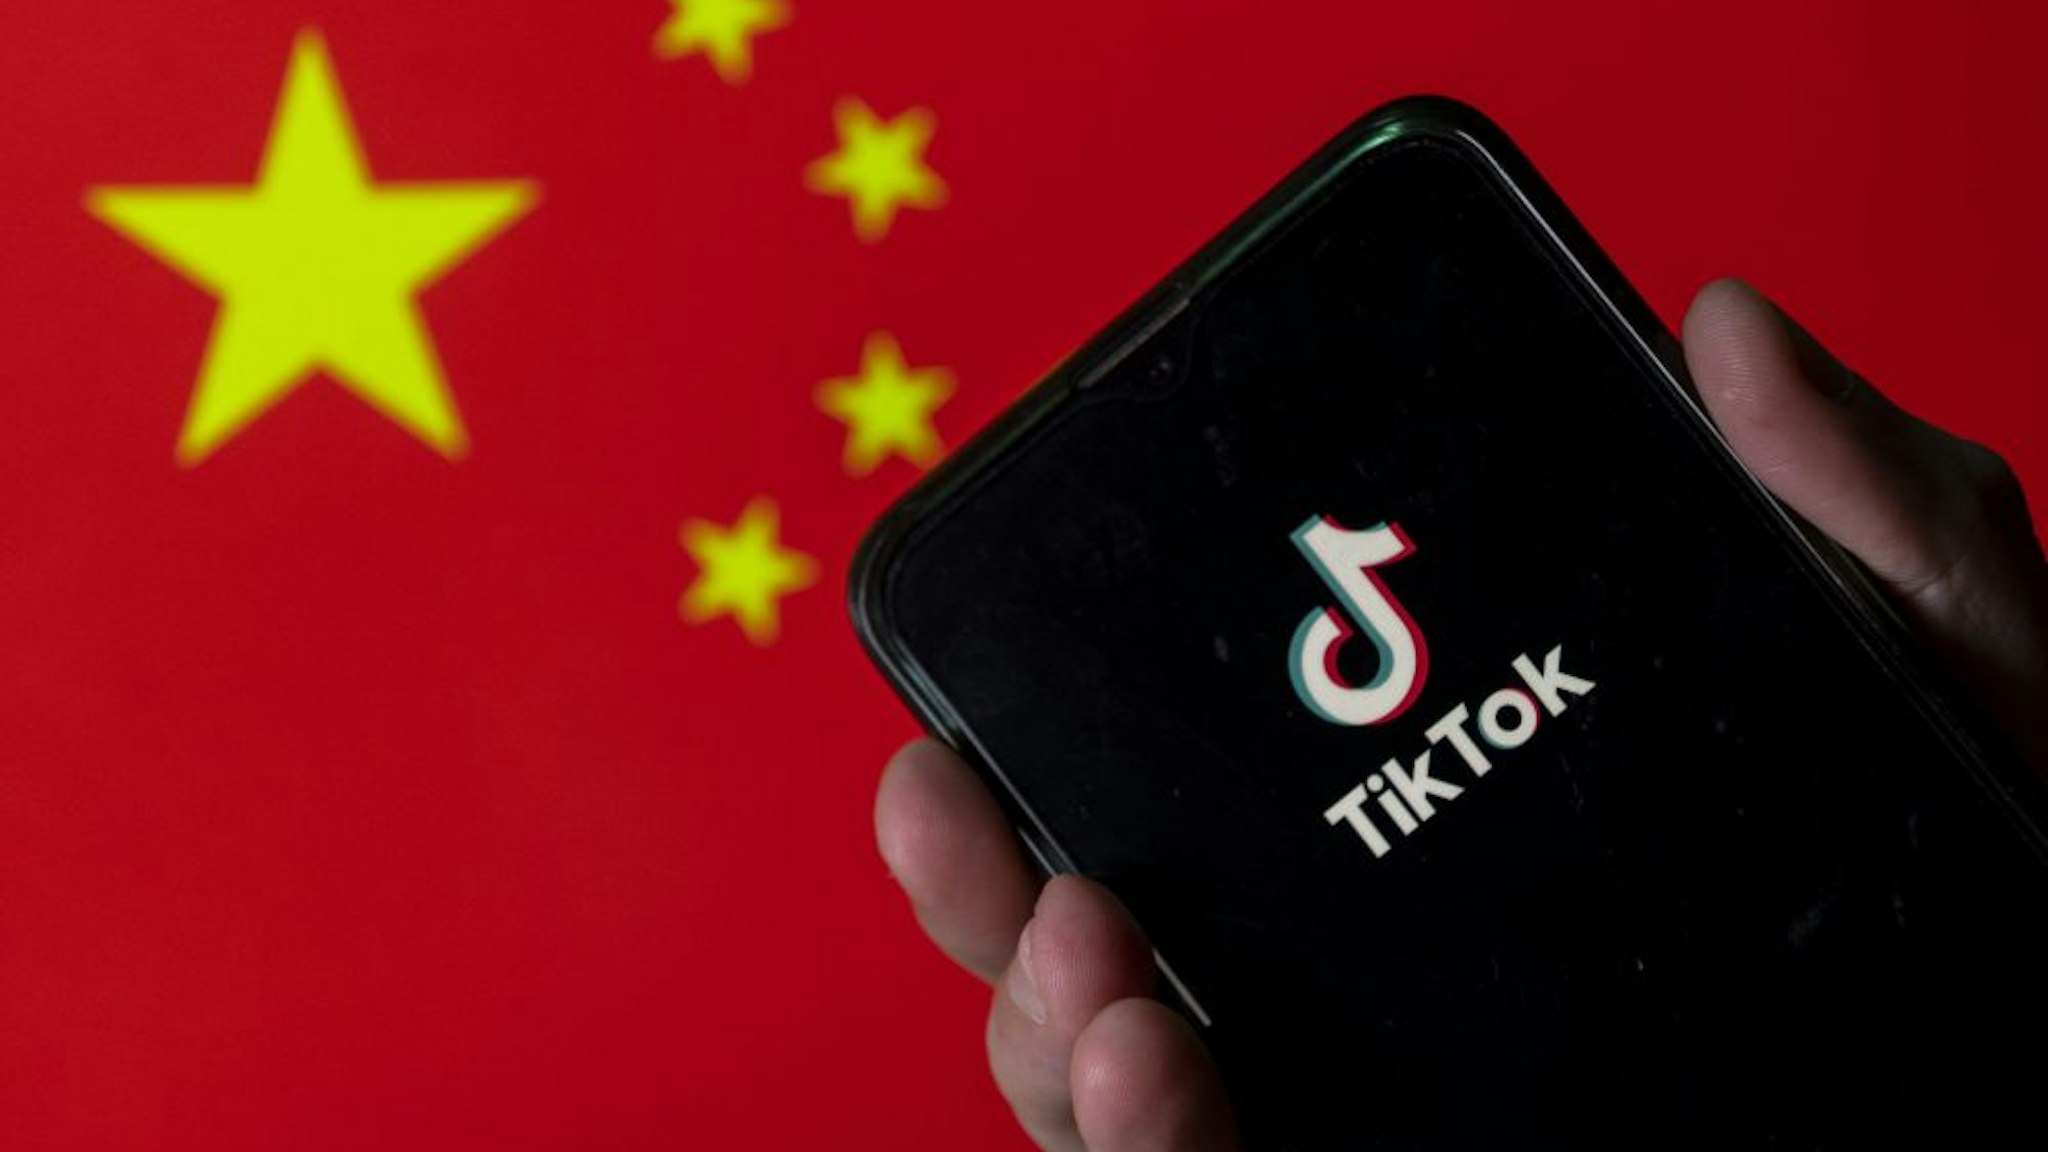 CHINA - 2020/08/11: In this photo illustration the Chinese video-sharing social networking service company, TikTok logo is seen on an Android mobile device with People's Republic of China flag in the background.